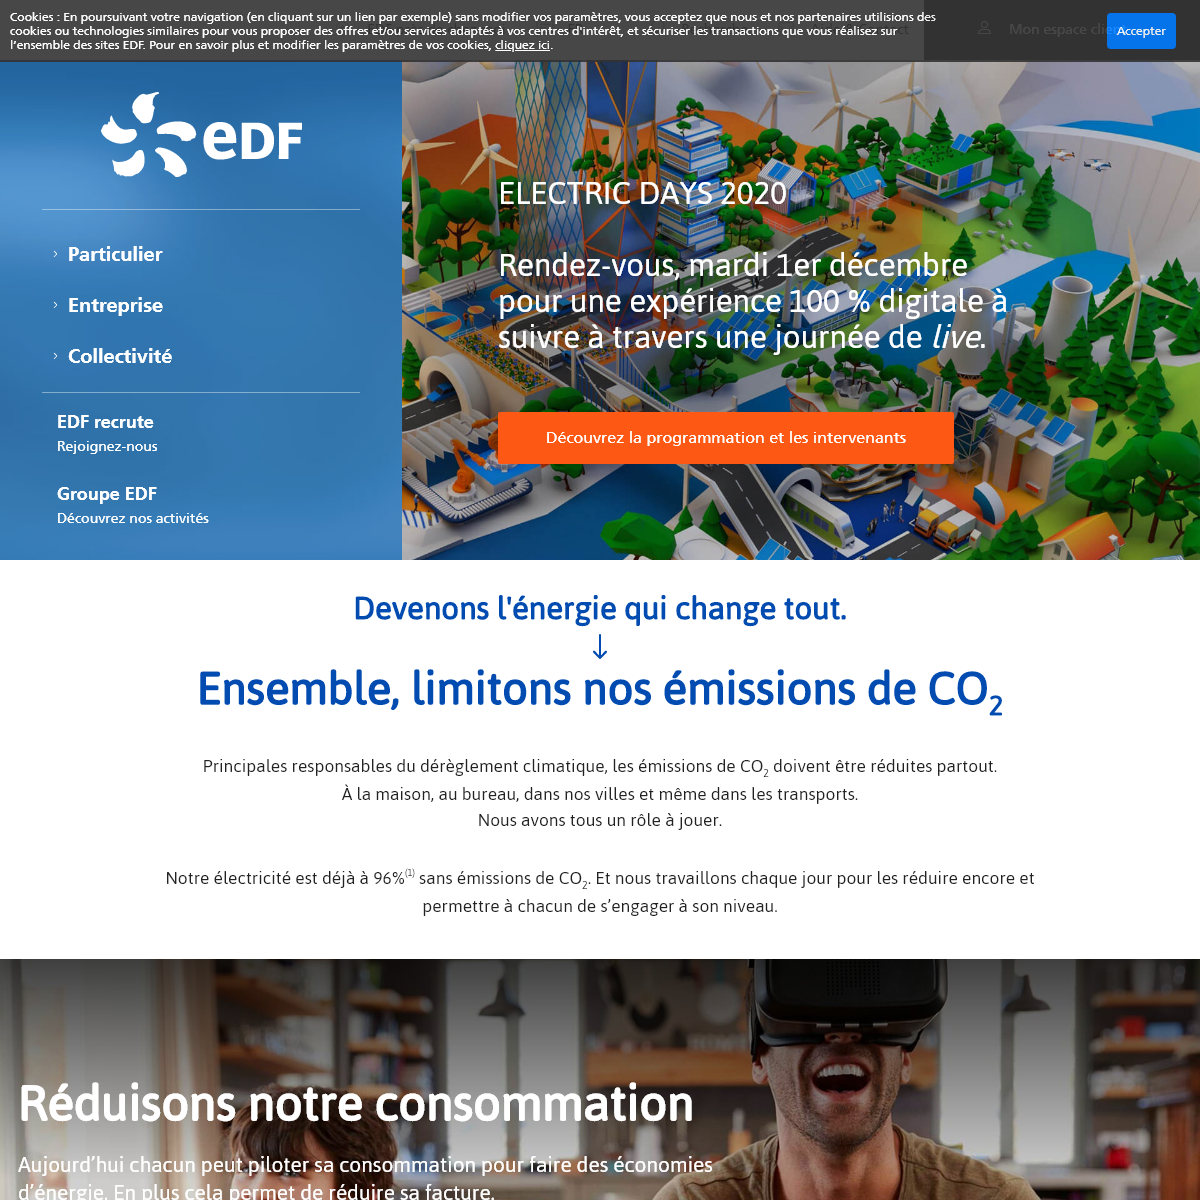 A complete backup of edf.com